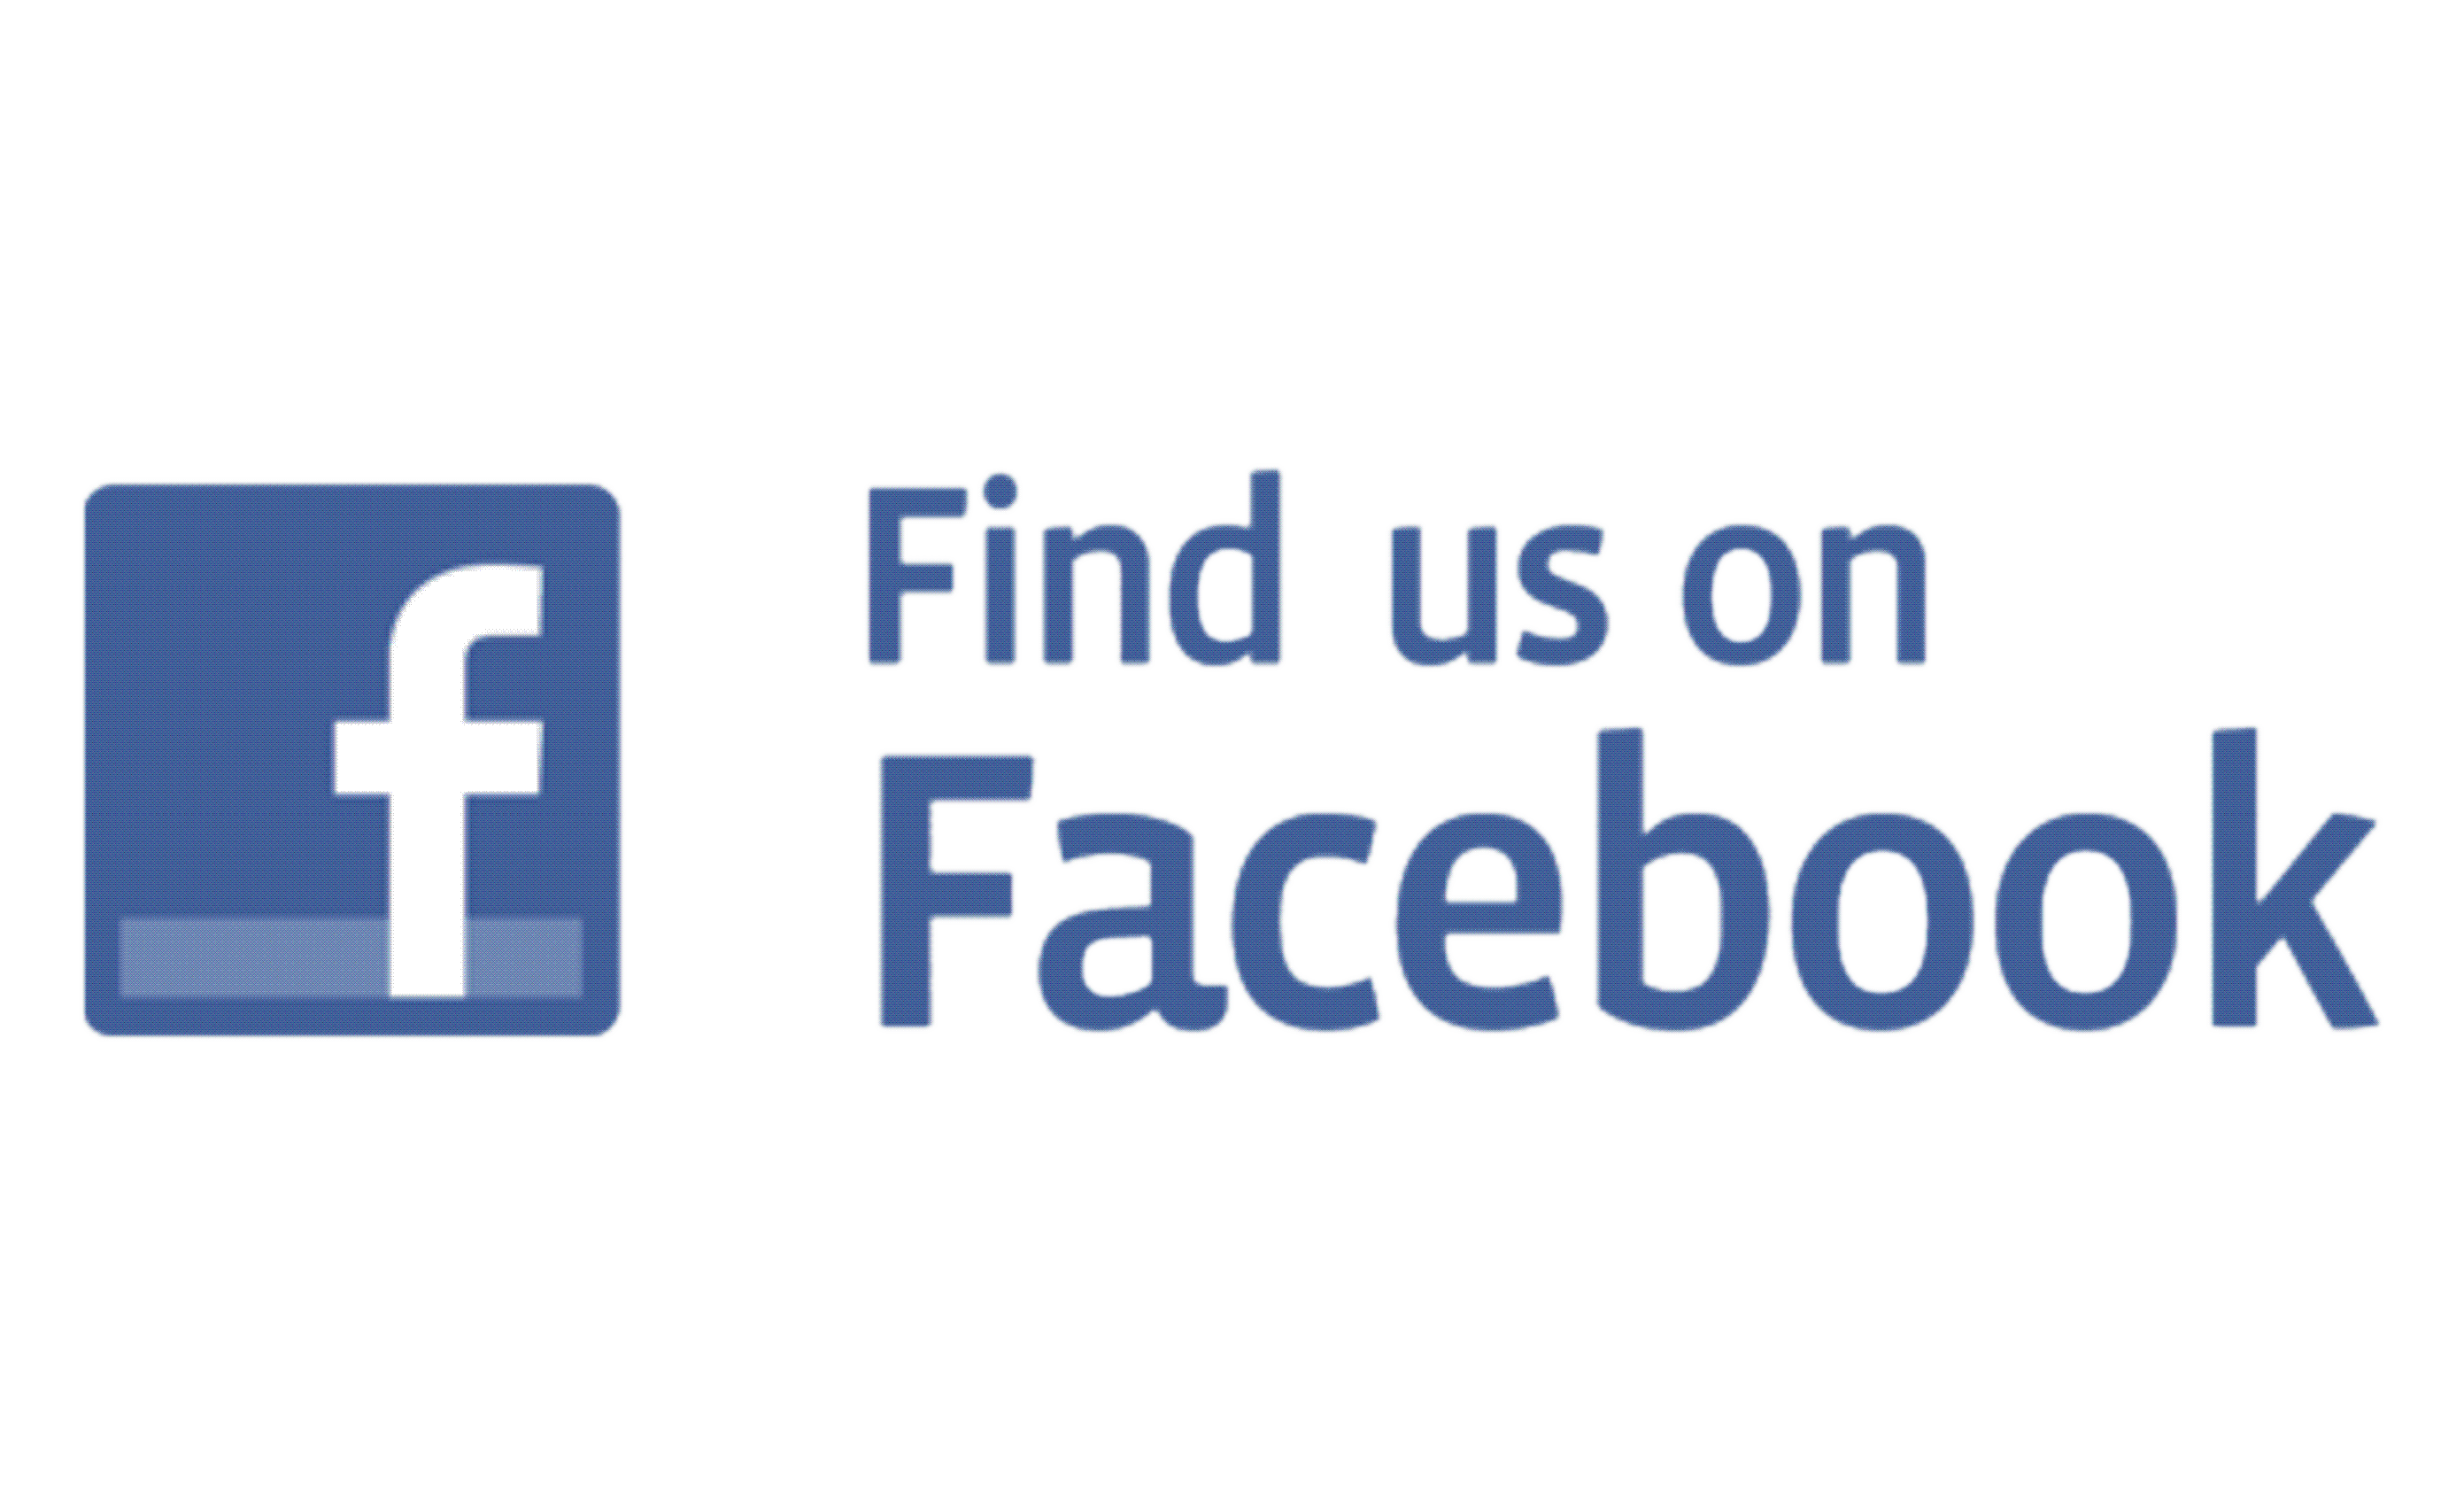 Find Me On Facebook Logo - Find us on Facebook Logo PNG Image #46272 - Free Icons and PNG ...